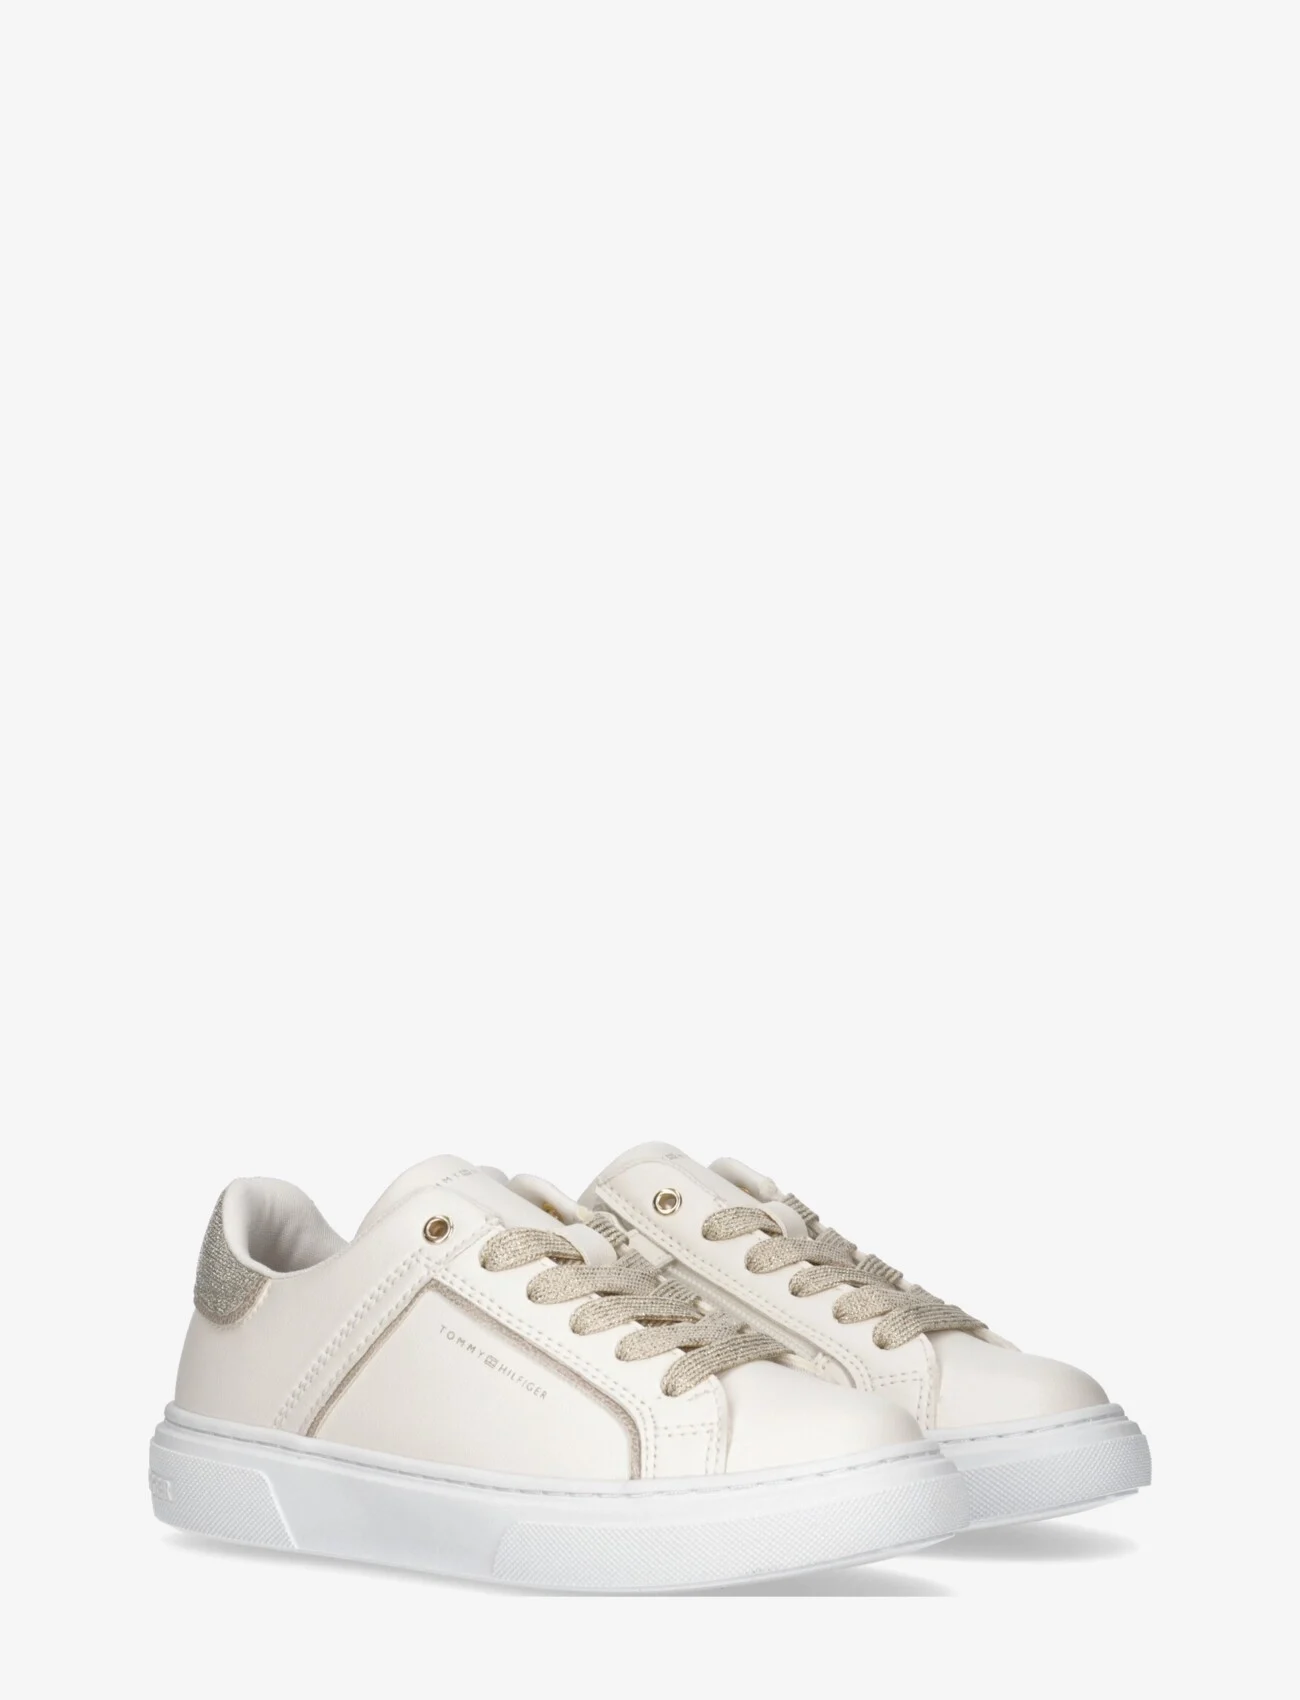 Tommy Hilfiger - LOW CUT LACE-UP SNEAKER - niedriger schnitt - off white/platinum - 0